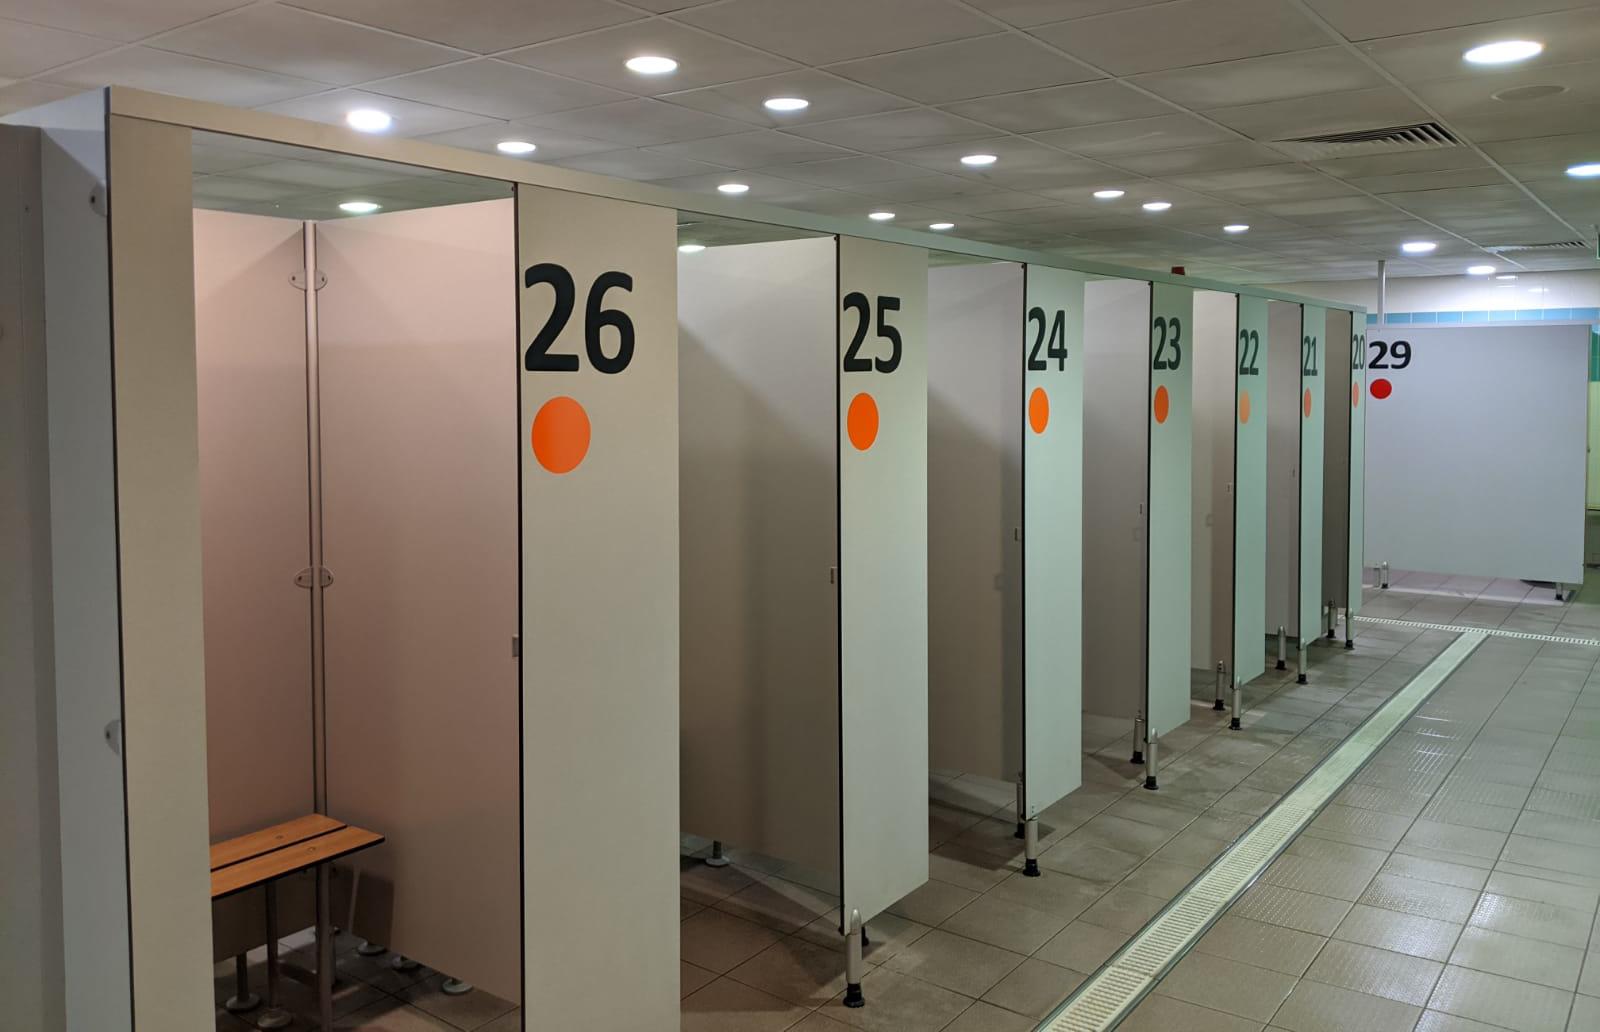 Orange cubicles for Stage 2 swimmers